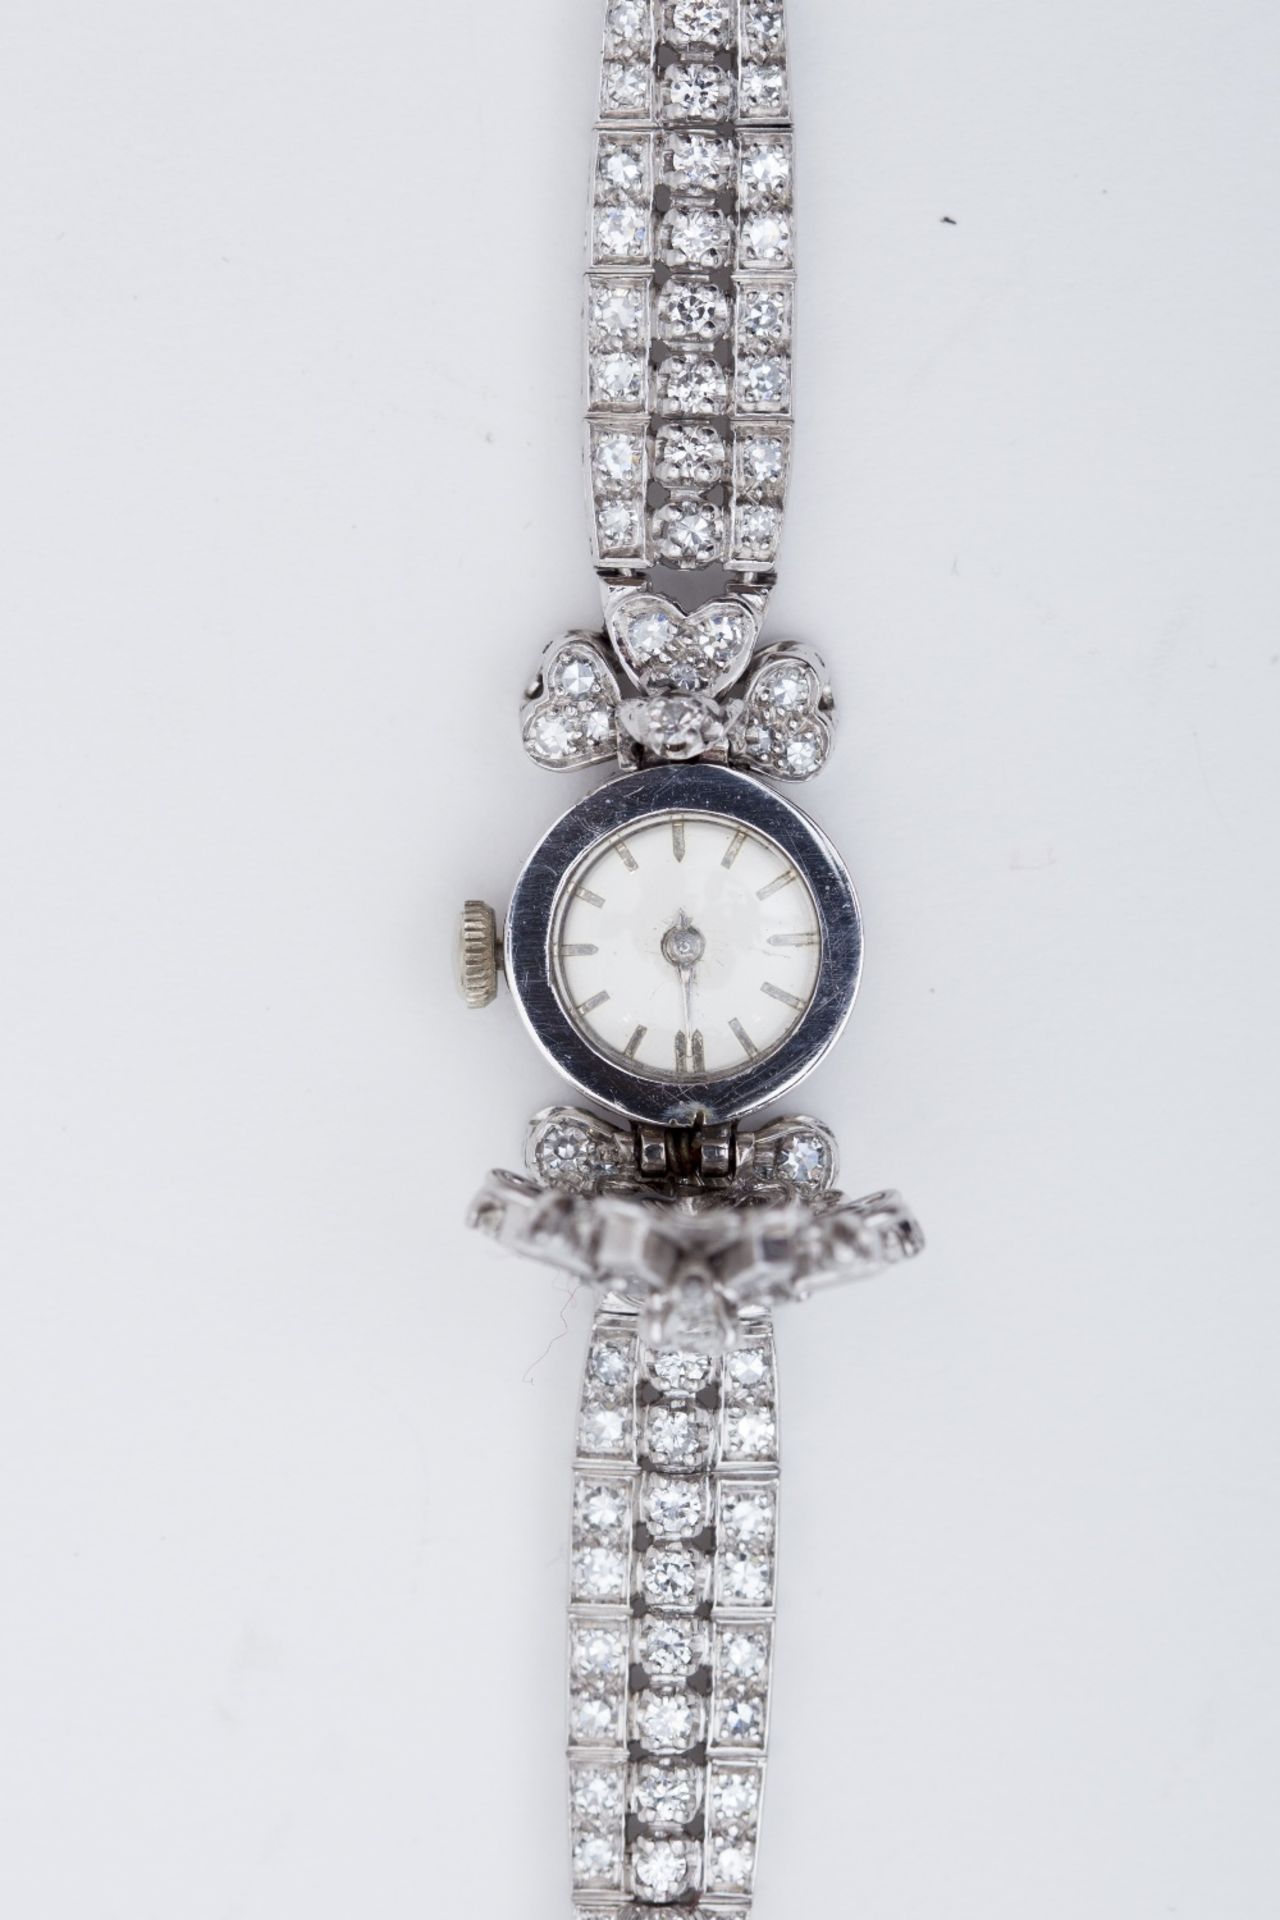 Lady's pocket watch: Platinum set with diamond baguettes and 8/8 brilliants. Unsigned movement. - Image 2 of 2